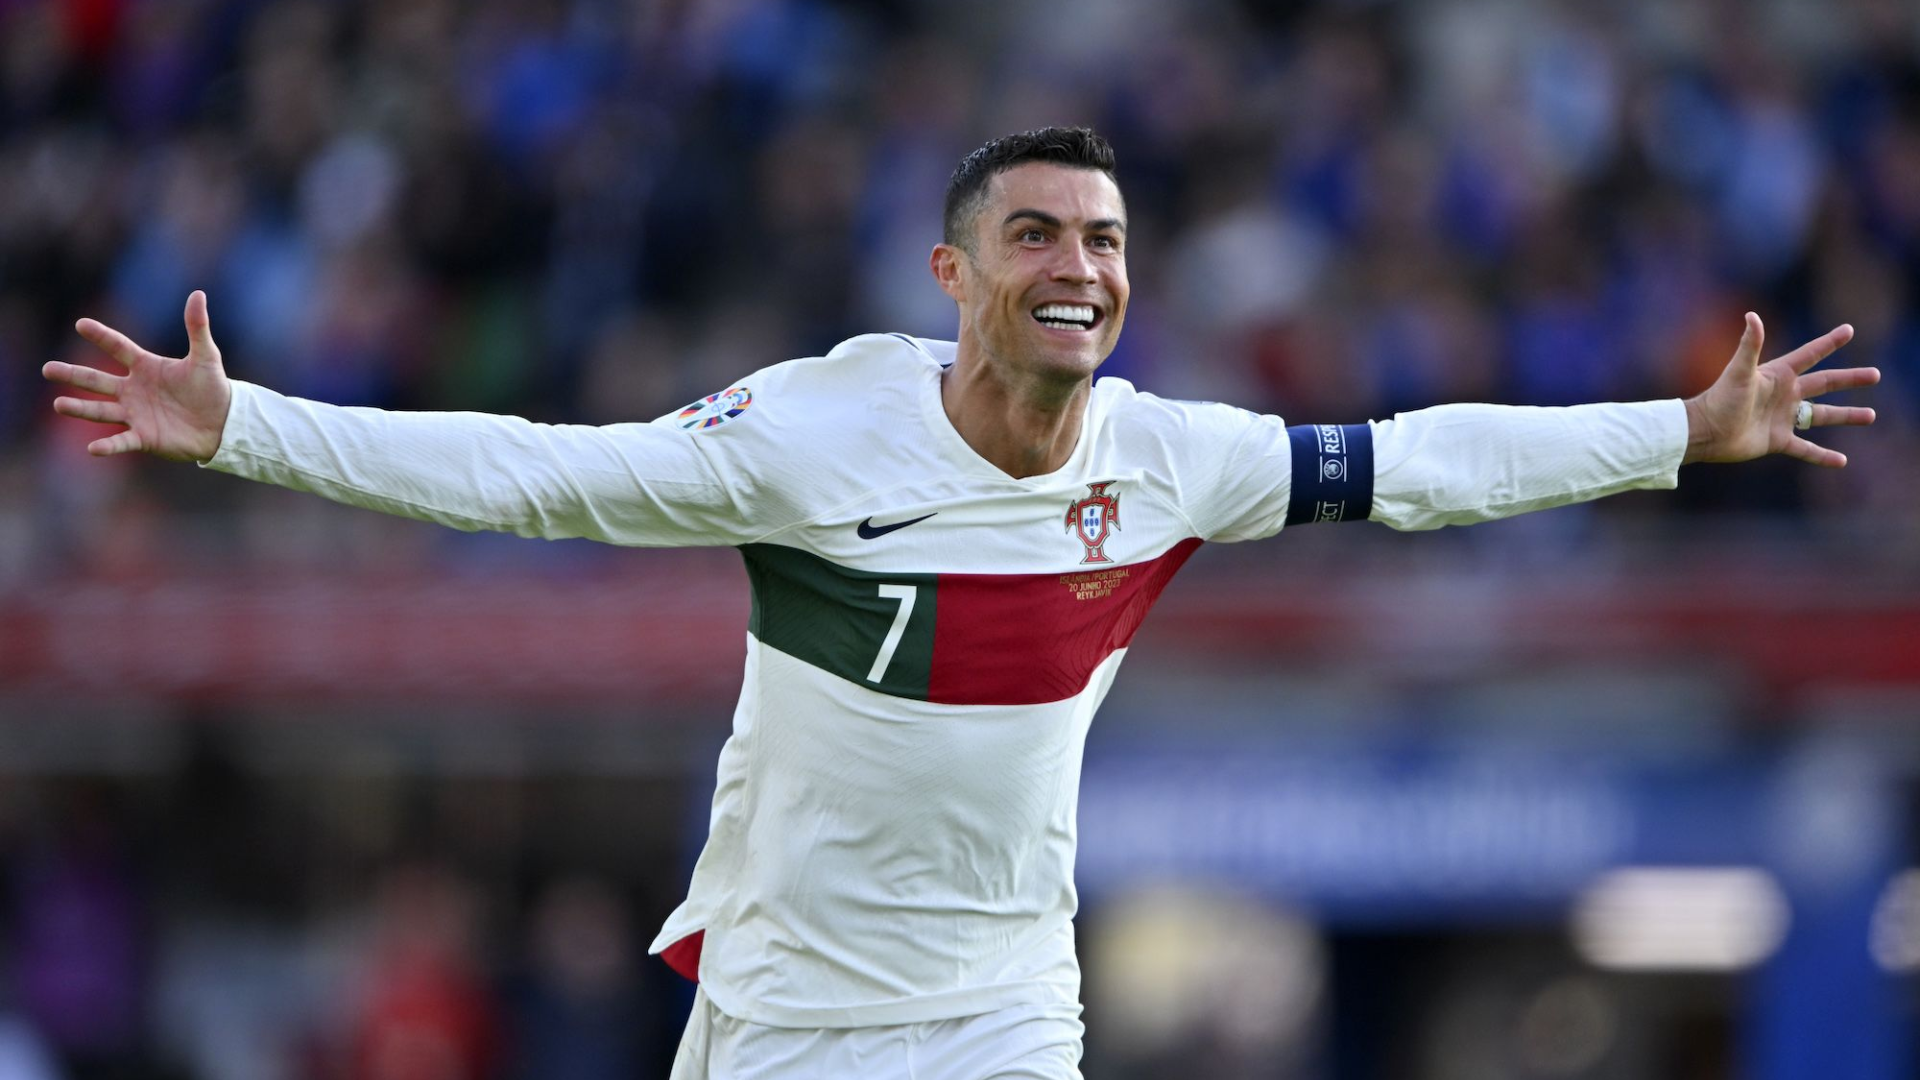 Ronaldo achieved 50 goals in 2023 and says there is still room for more!